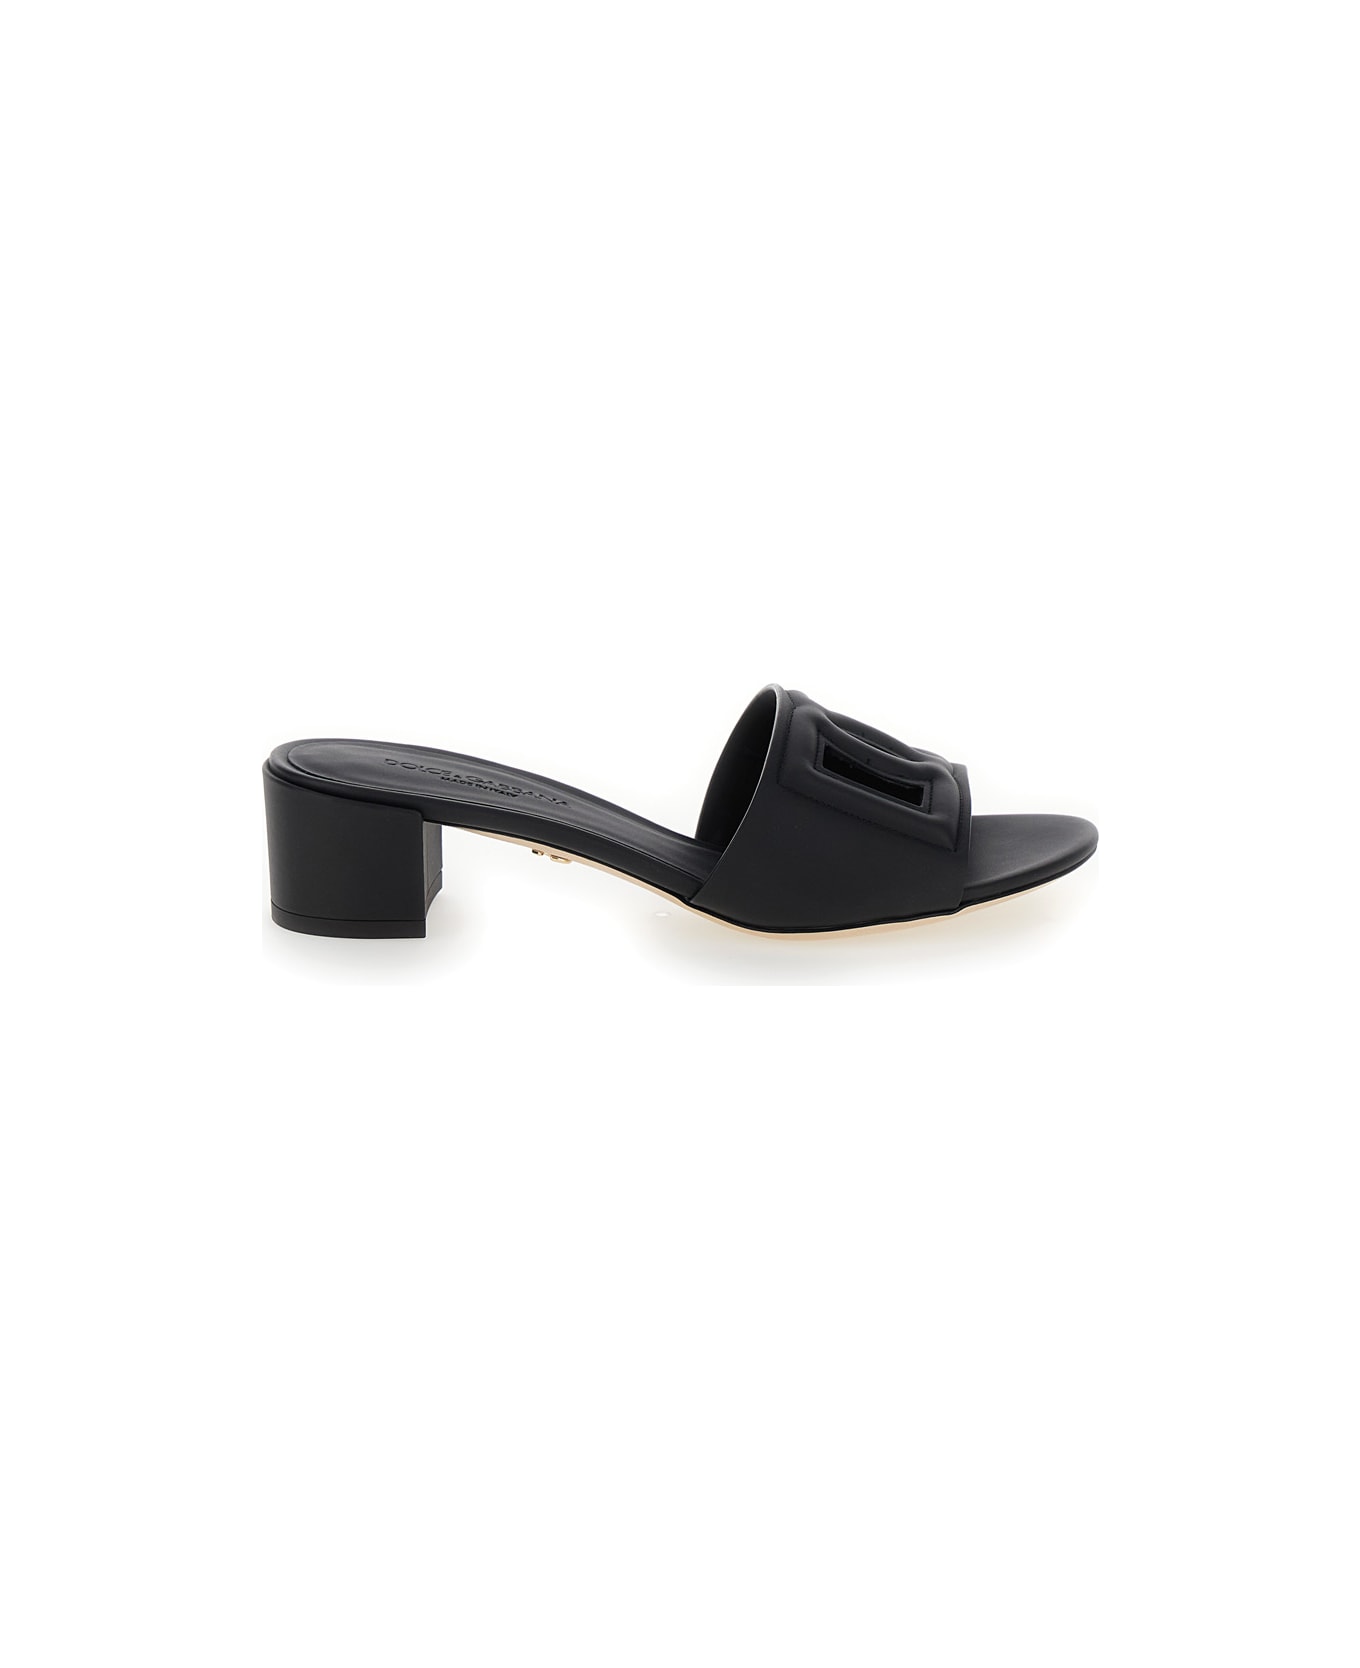 Dolce & Gabbana Black Mules With Low Heel And Dg Millennials Detail In Smooth Leather Woman - Black